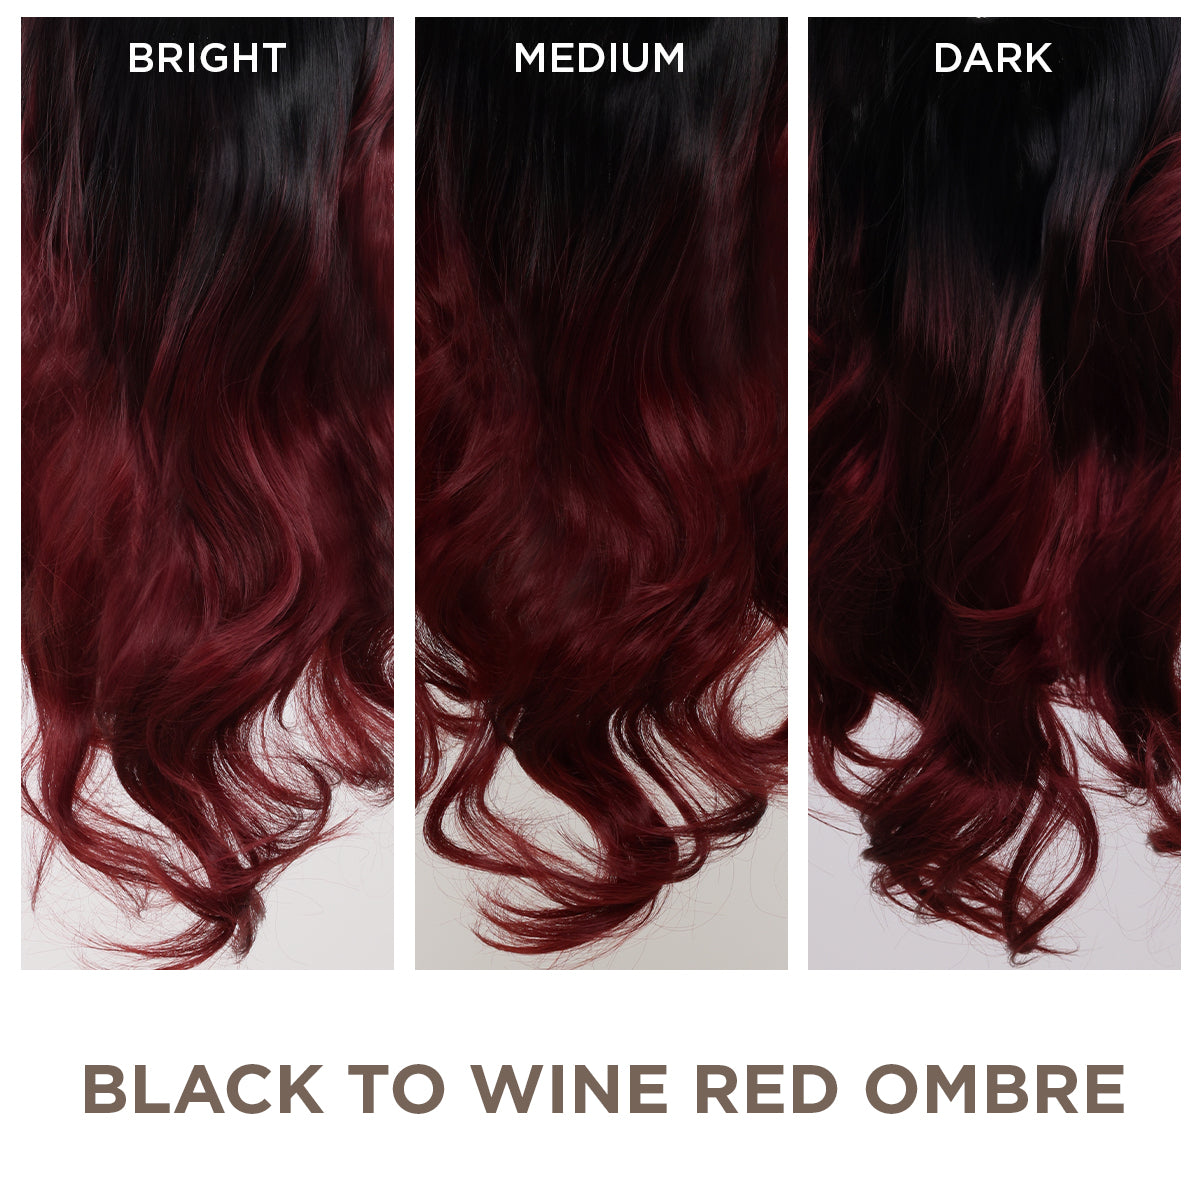 Black to Wine Red Ombre + 1 FREE HALO